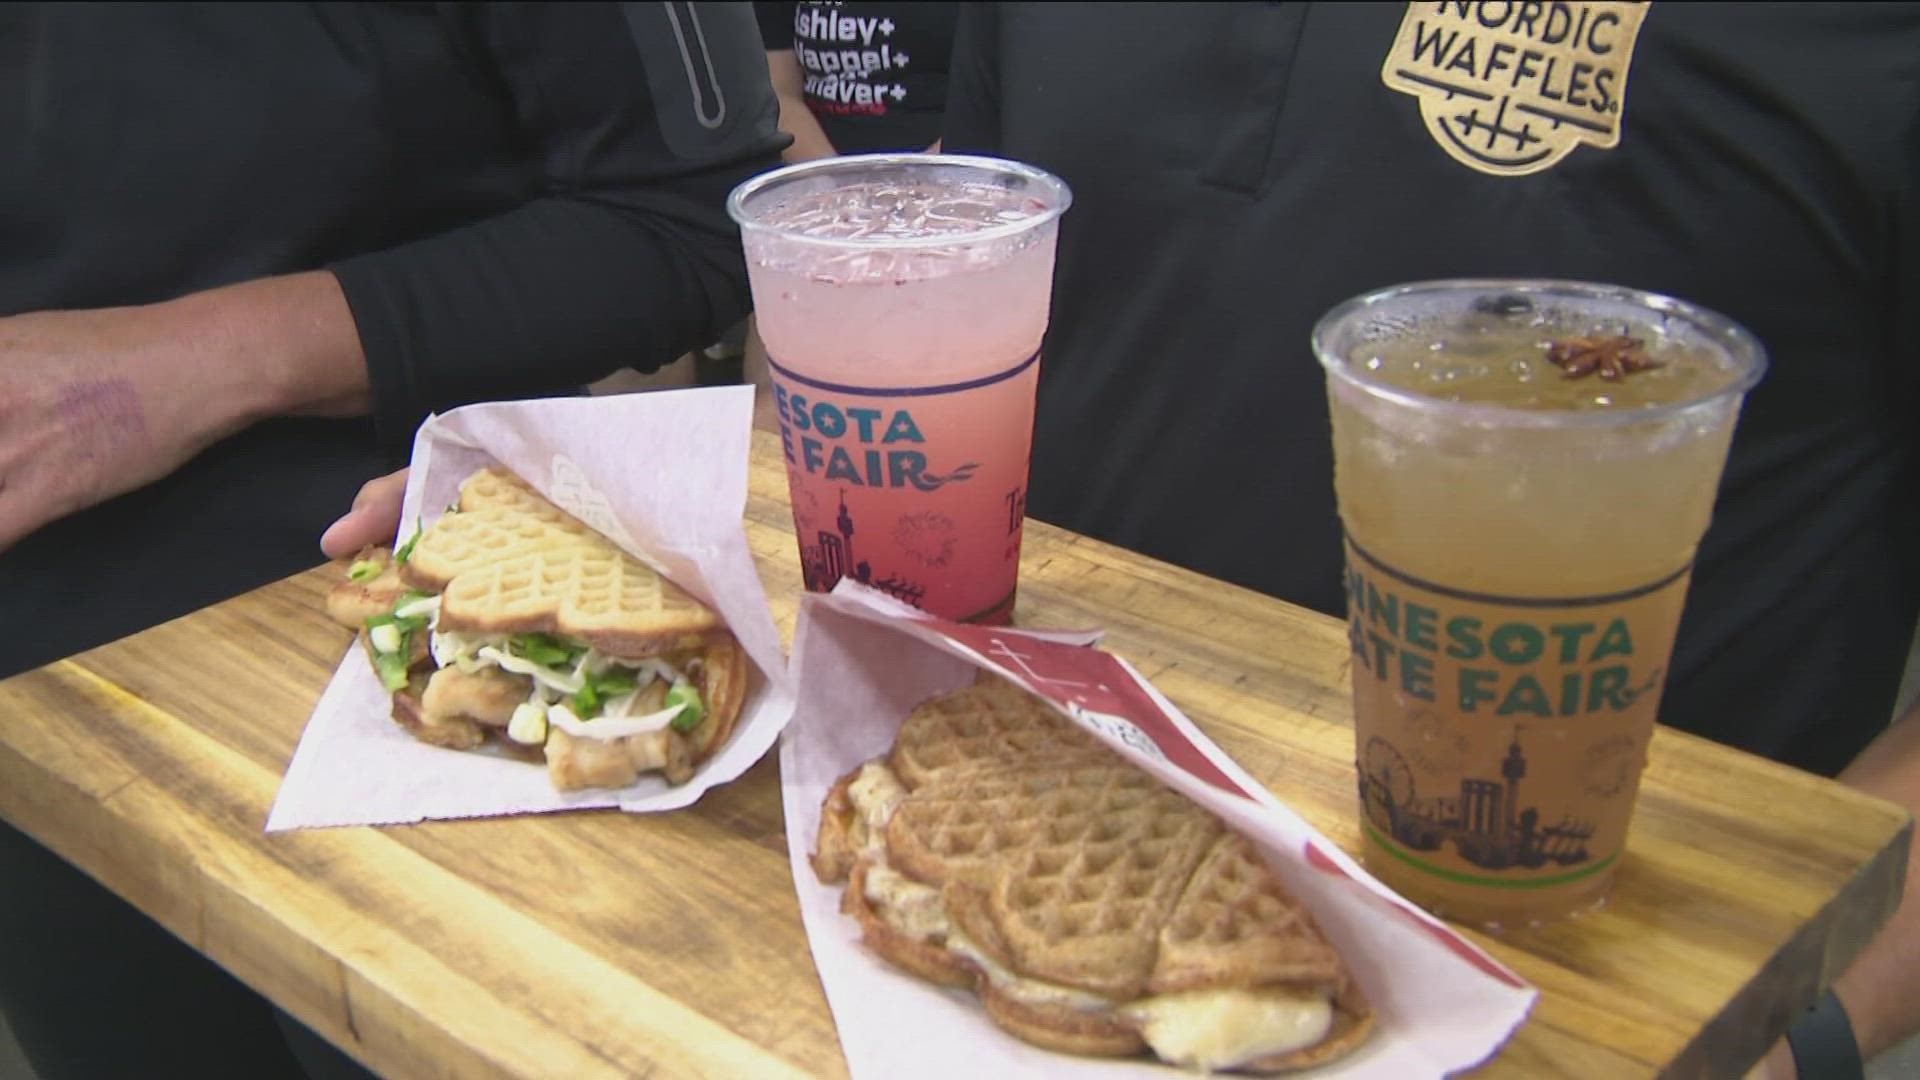 Stine Aasland, founder of Nordic Waffles, joined KARE 11 News Saturday to offer samples of her waffle sandwiches.